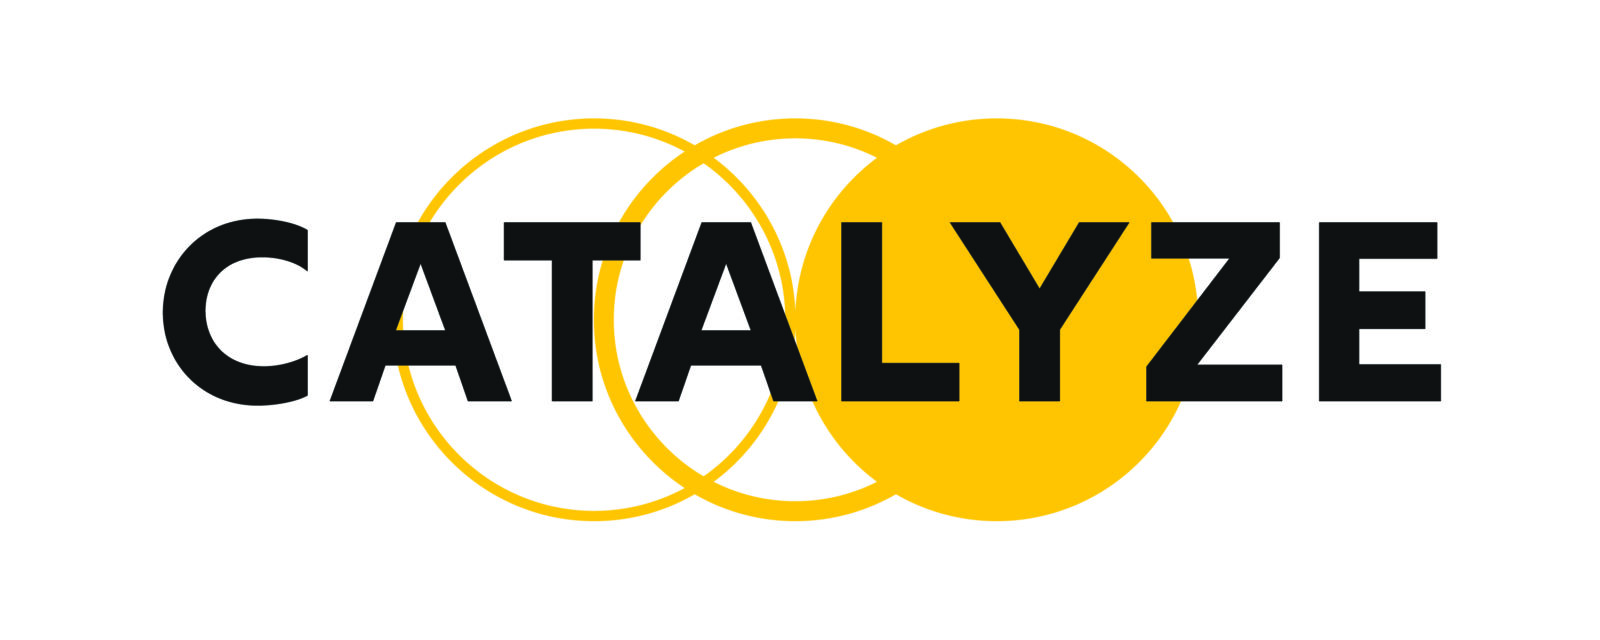 Catalyze logo text in black with yellow circles